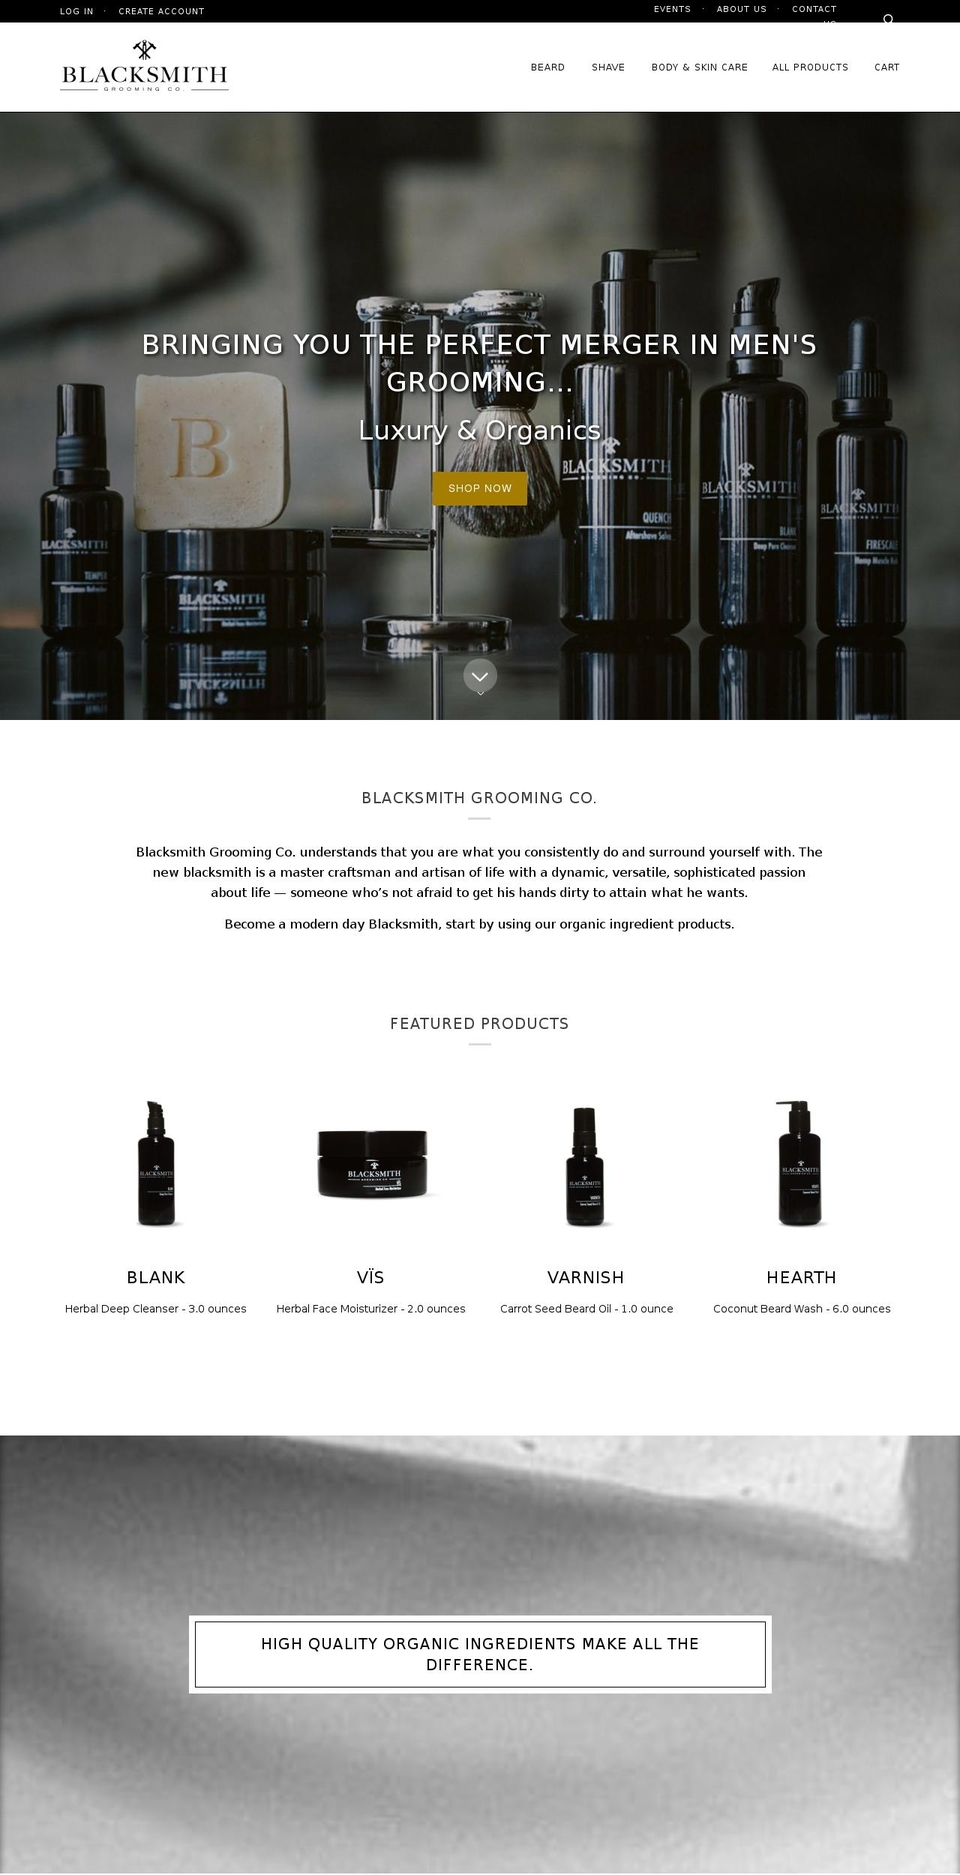 Copy of Pipeline Shopify theme site example blacksmithgrooming.com